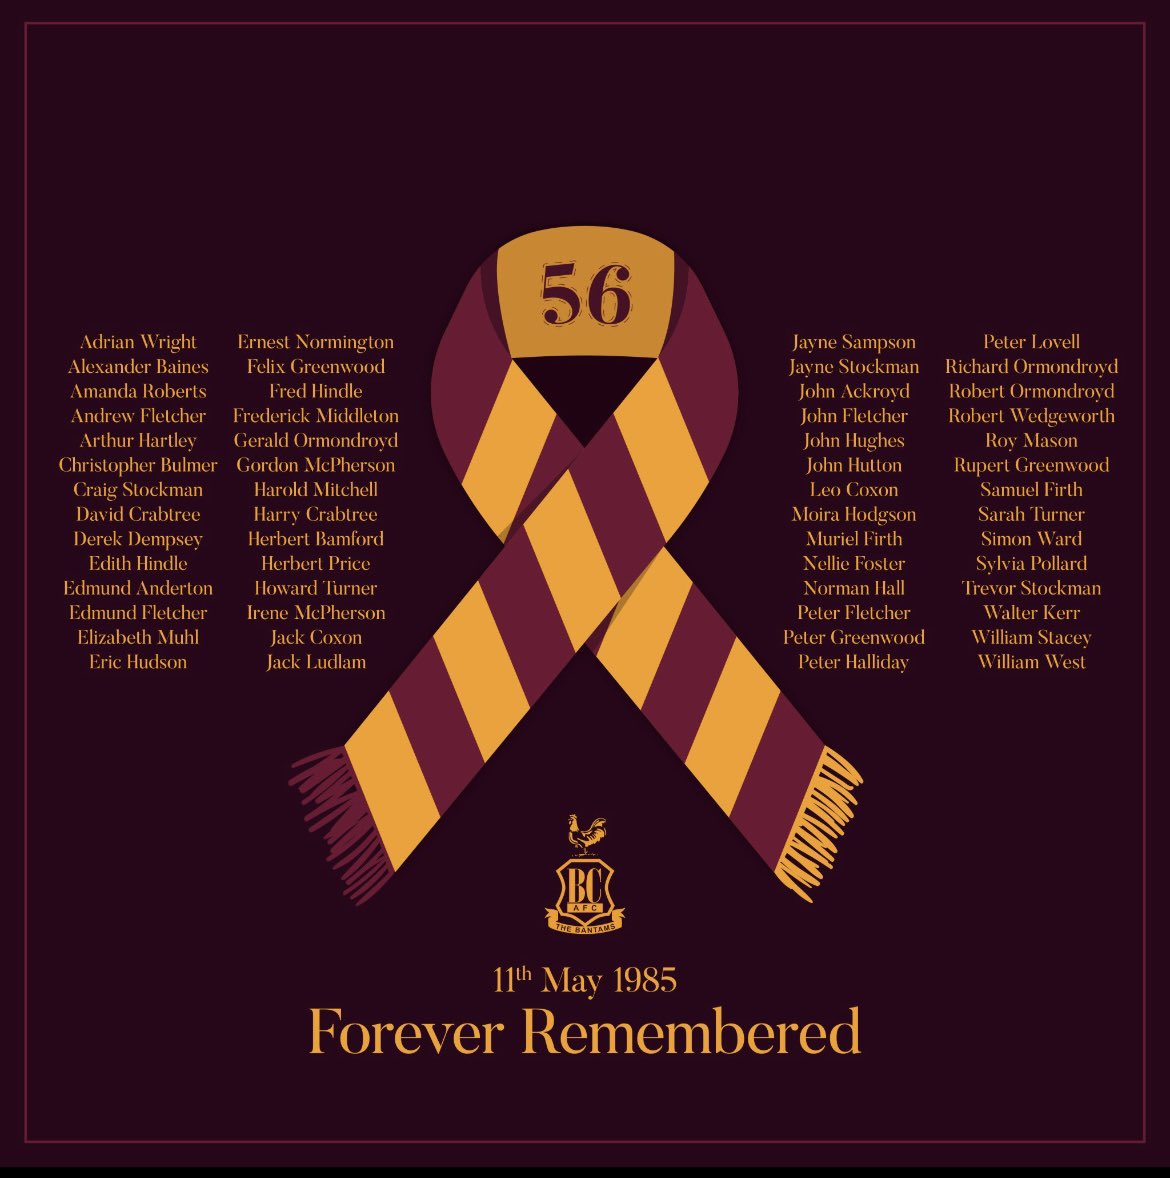 Remembering those fans of #BradfordCity & #LincolnCity who went to a match 39 years ago and did not come home to their loved ones. Thoughts with their families today. Forever Remembered. #FootballFamily #BCAFC #LCFC